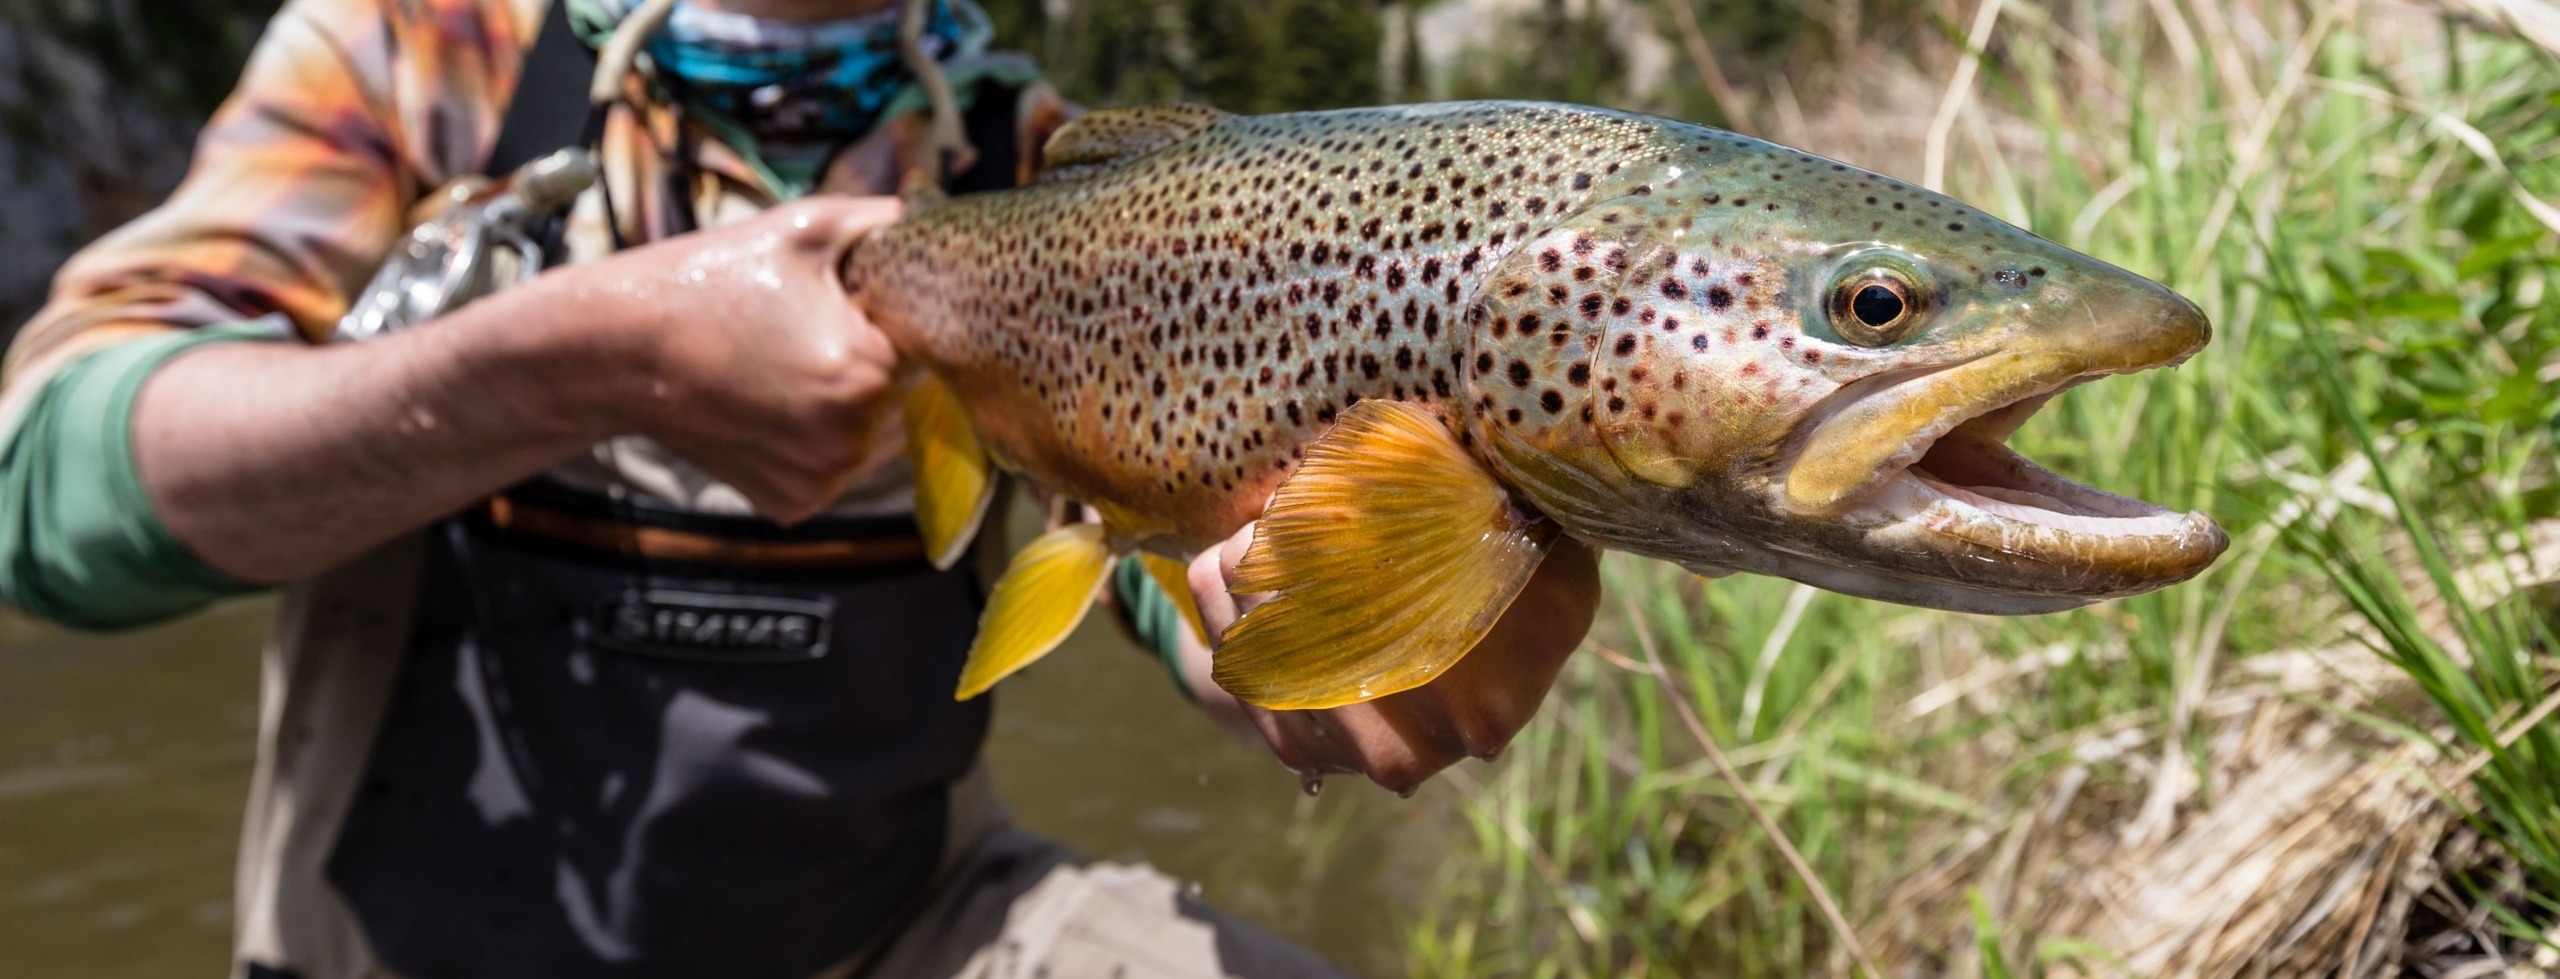 Fly Fishing, Blog, Photos, Podcasts, Travel, Gear